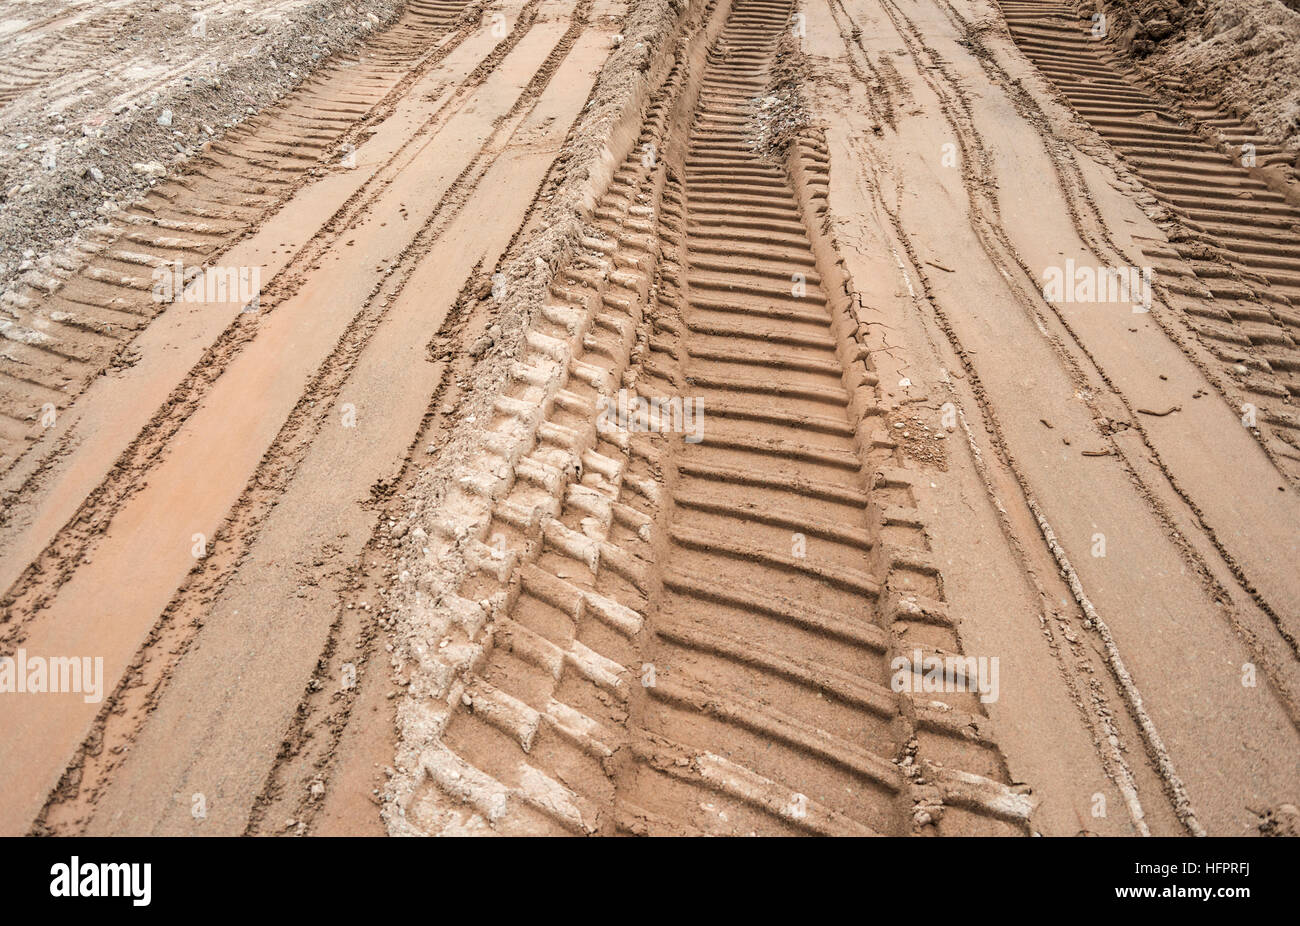 Bulldozer tracks on a surface of brown and gray sand Stock Photo